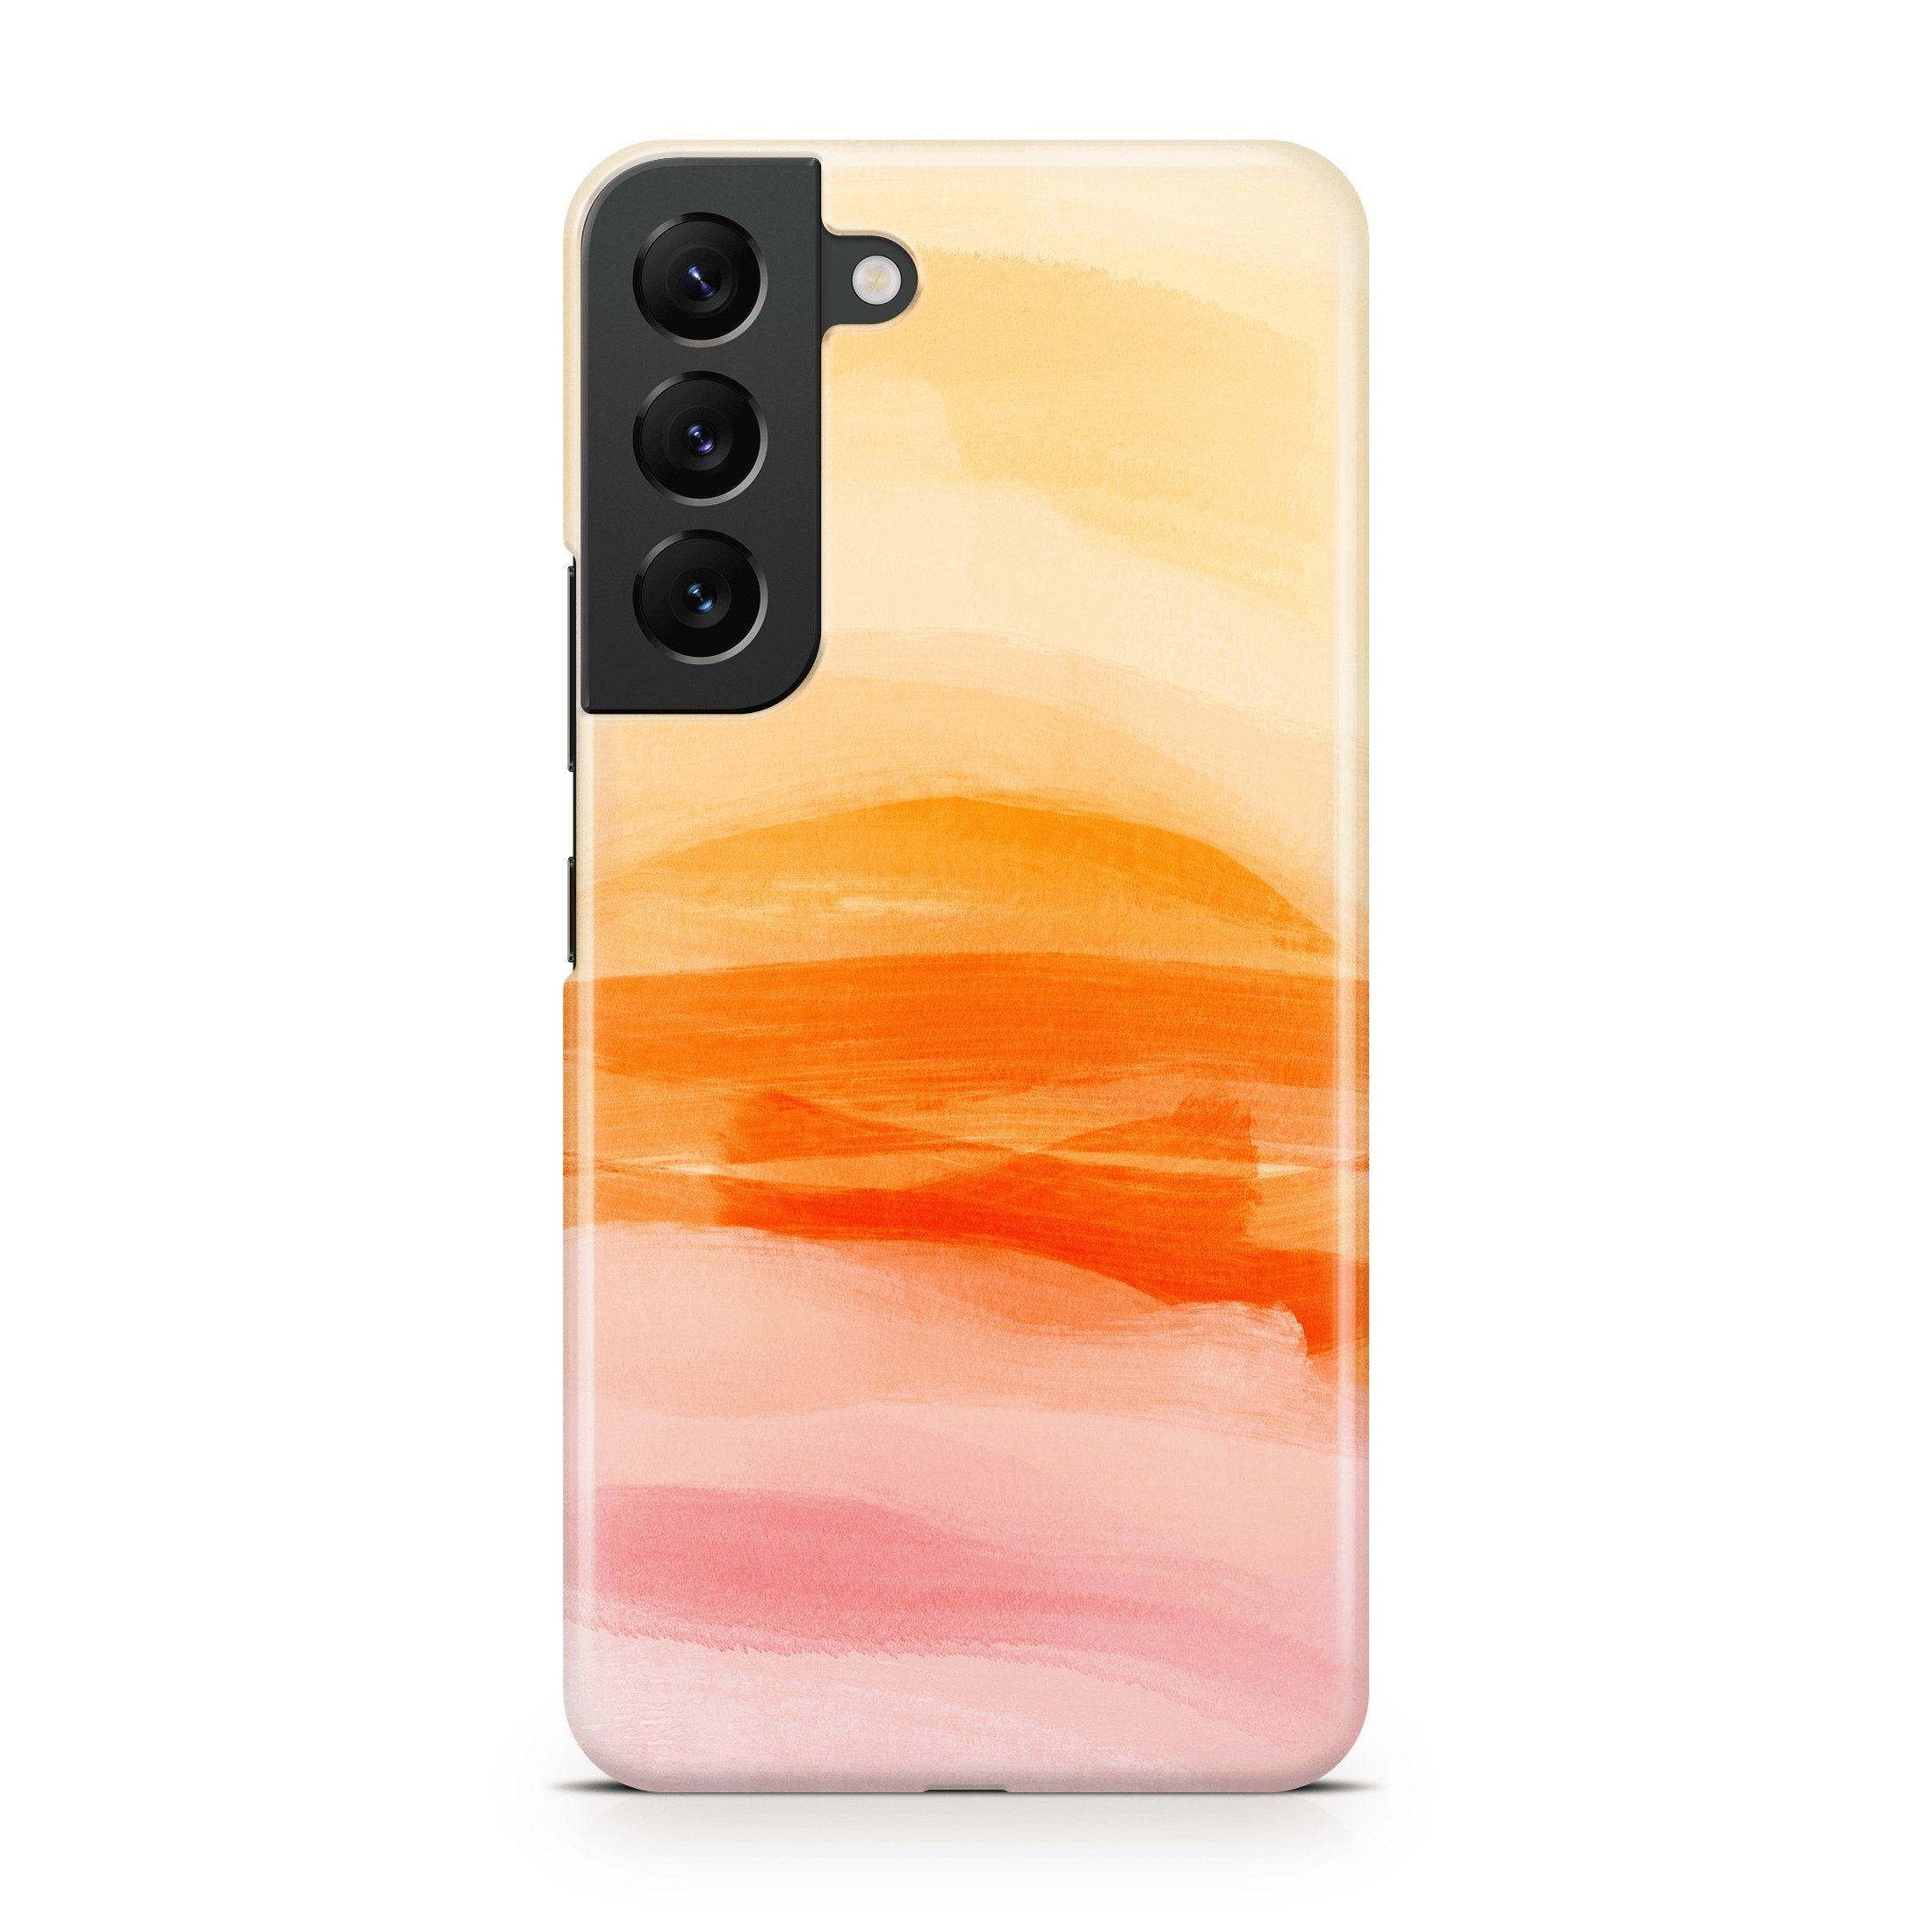 Blazing Orange Ombre - Samsung phone case designs by CaseSwagger